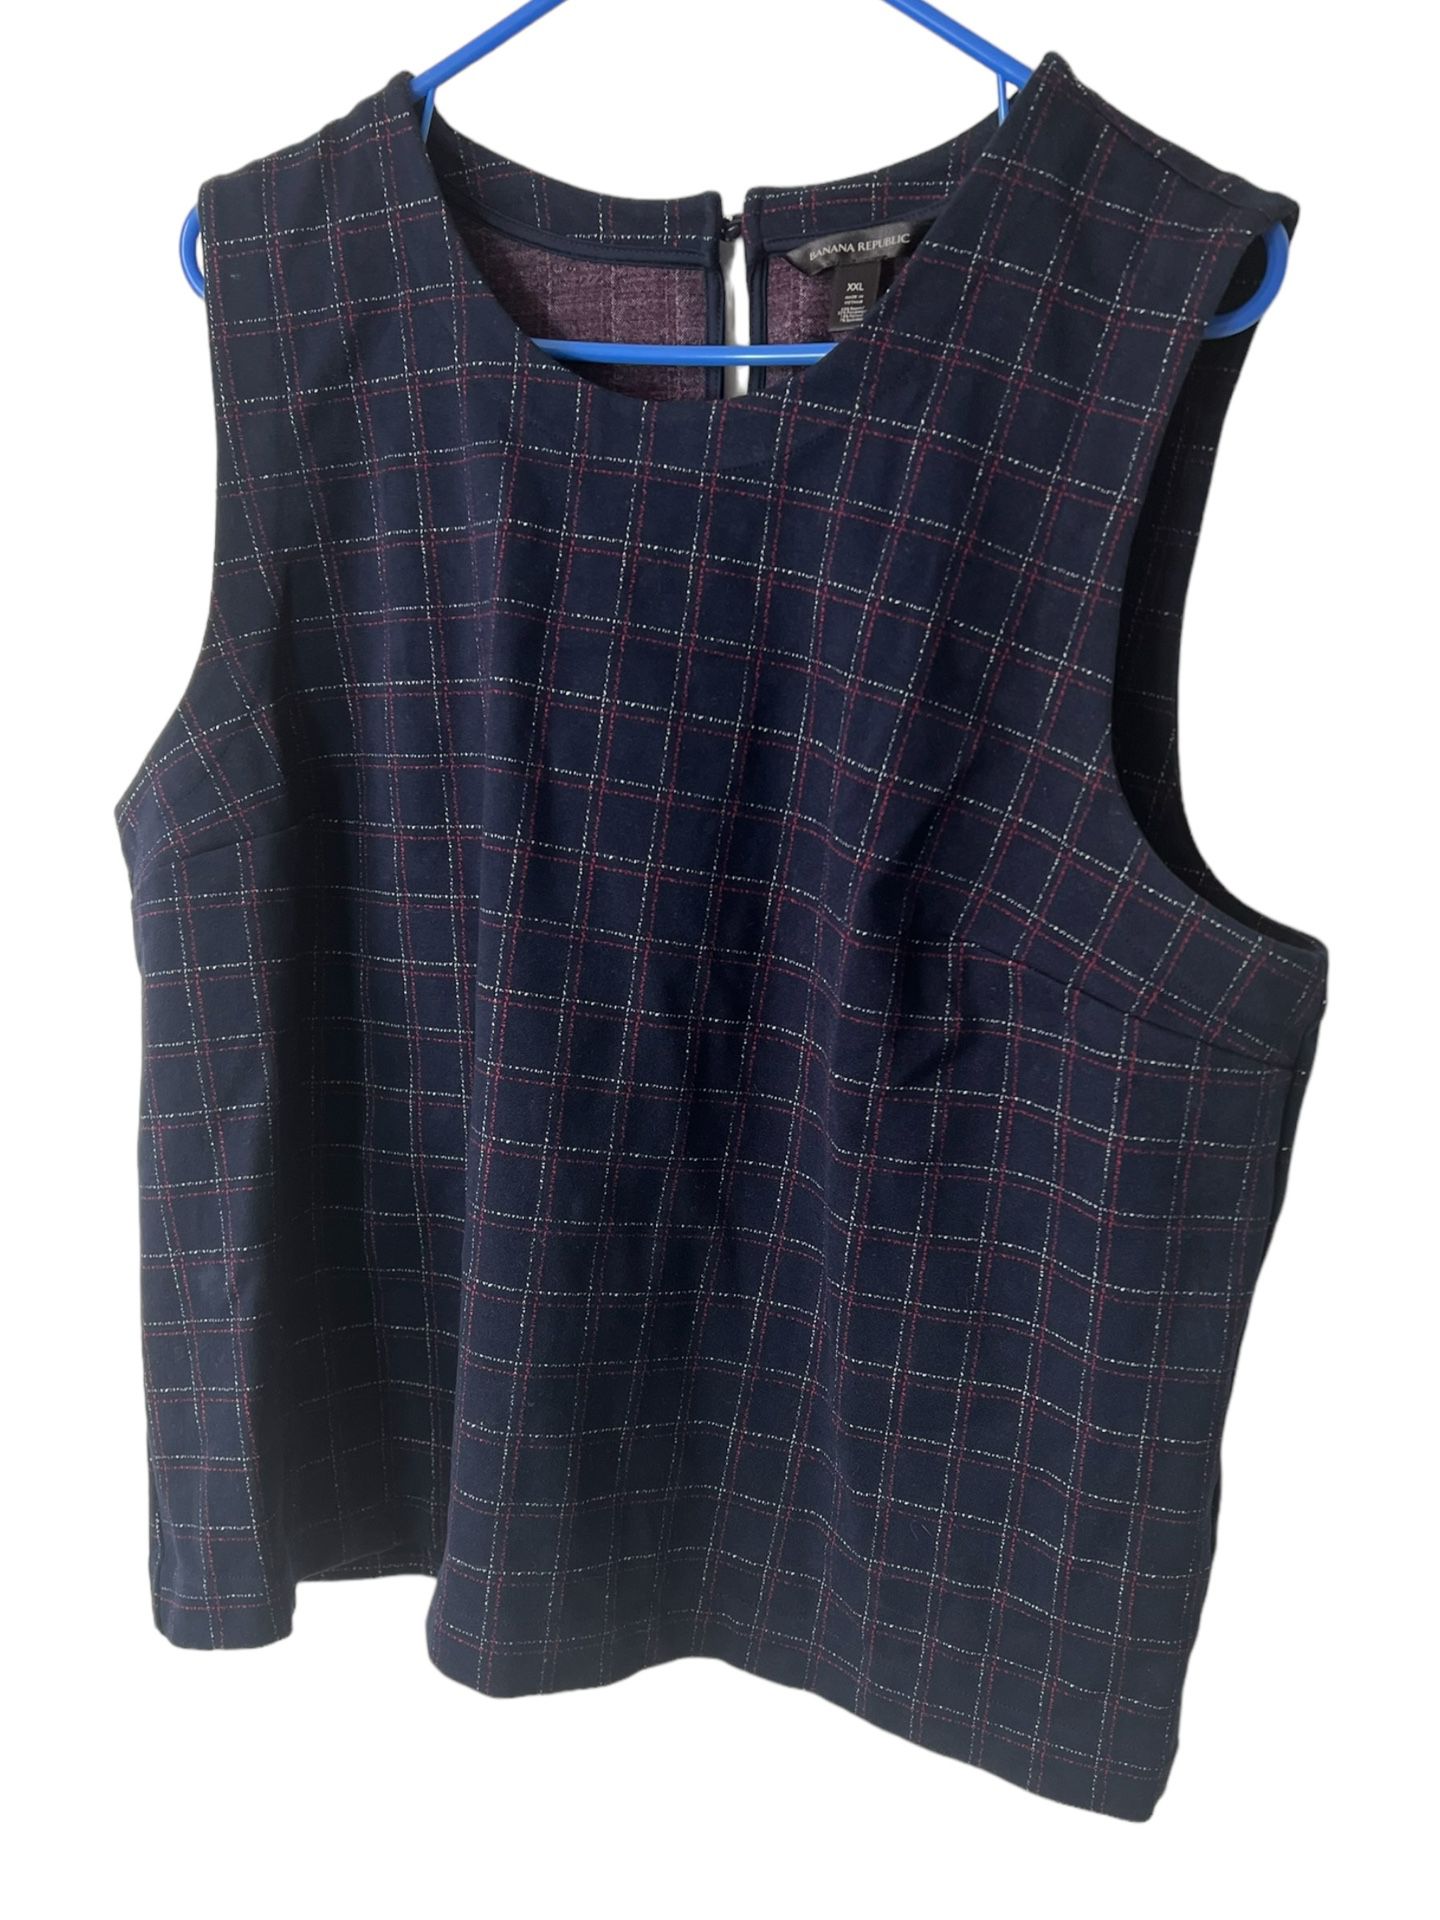 Banana Republic Factory Shell Blouse Size 2XL Sleeveless Navy Blue Plaid  Comes from a pet and smoke free home.  Measurements are in the pictures. Ele